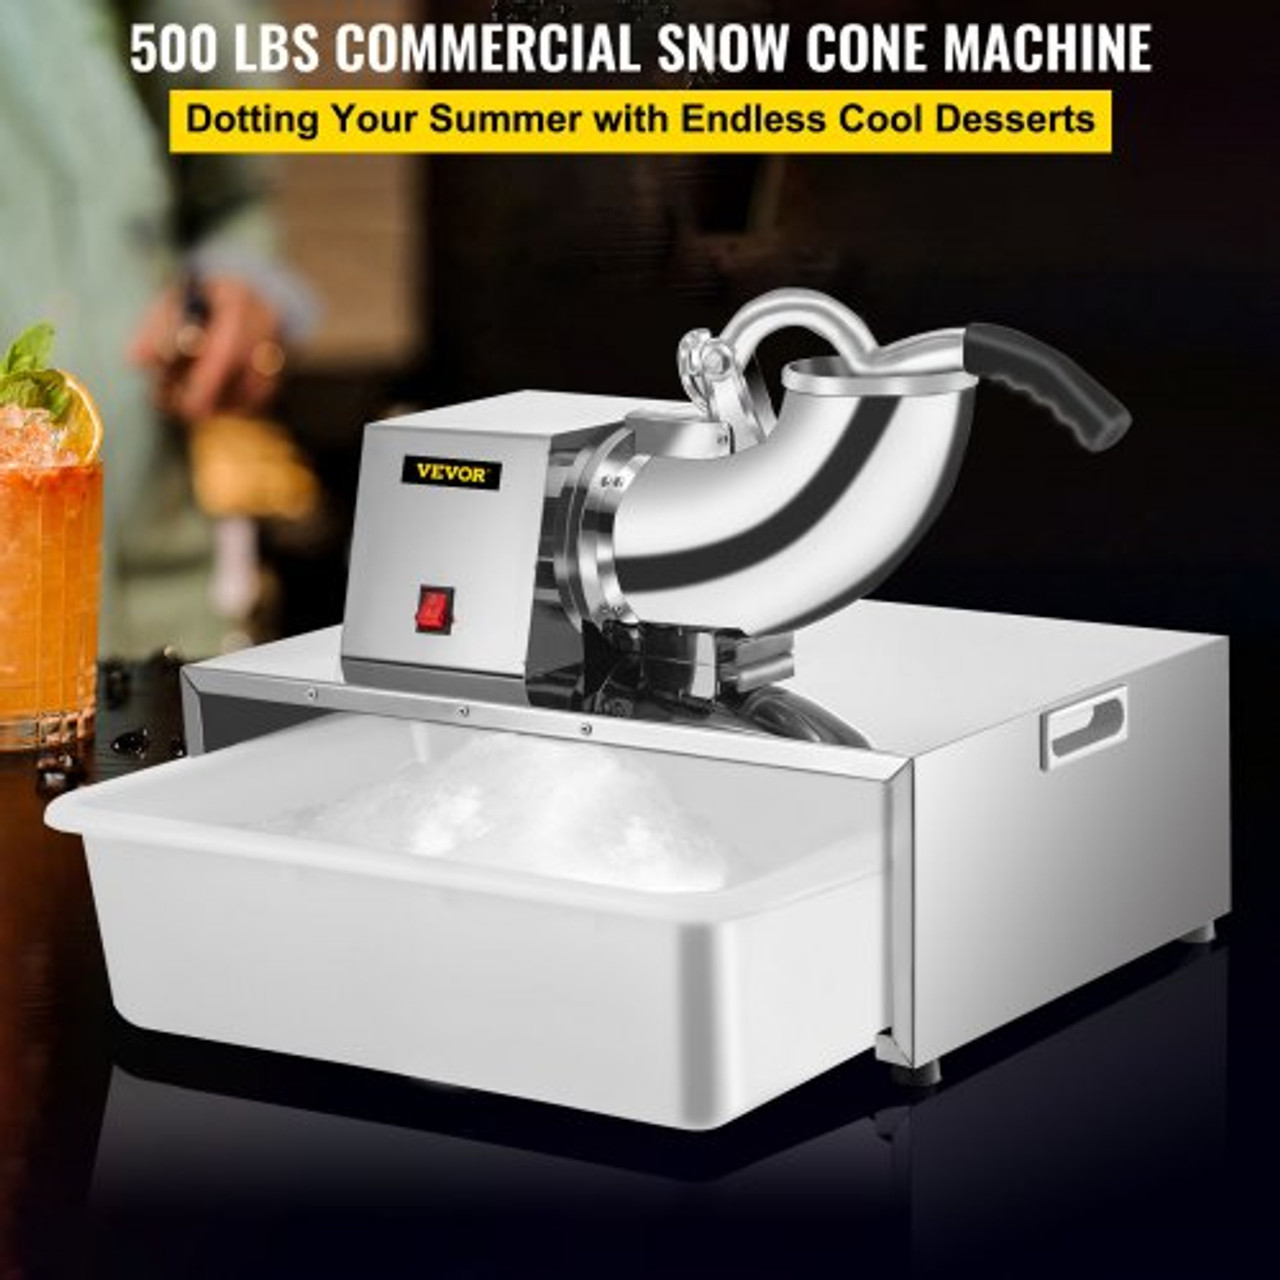 110V Commercial Snow Cone Machine, 500LB/H Commercial Snow Cone Maker, Electric Shaved Ice Machine w/Dual Blades, Stainless Steel Ice Crusher Shaver w/ 20Qt Ice Basin, 250W Snowball Machine 1420RPM